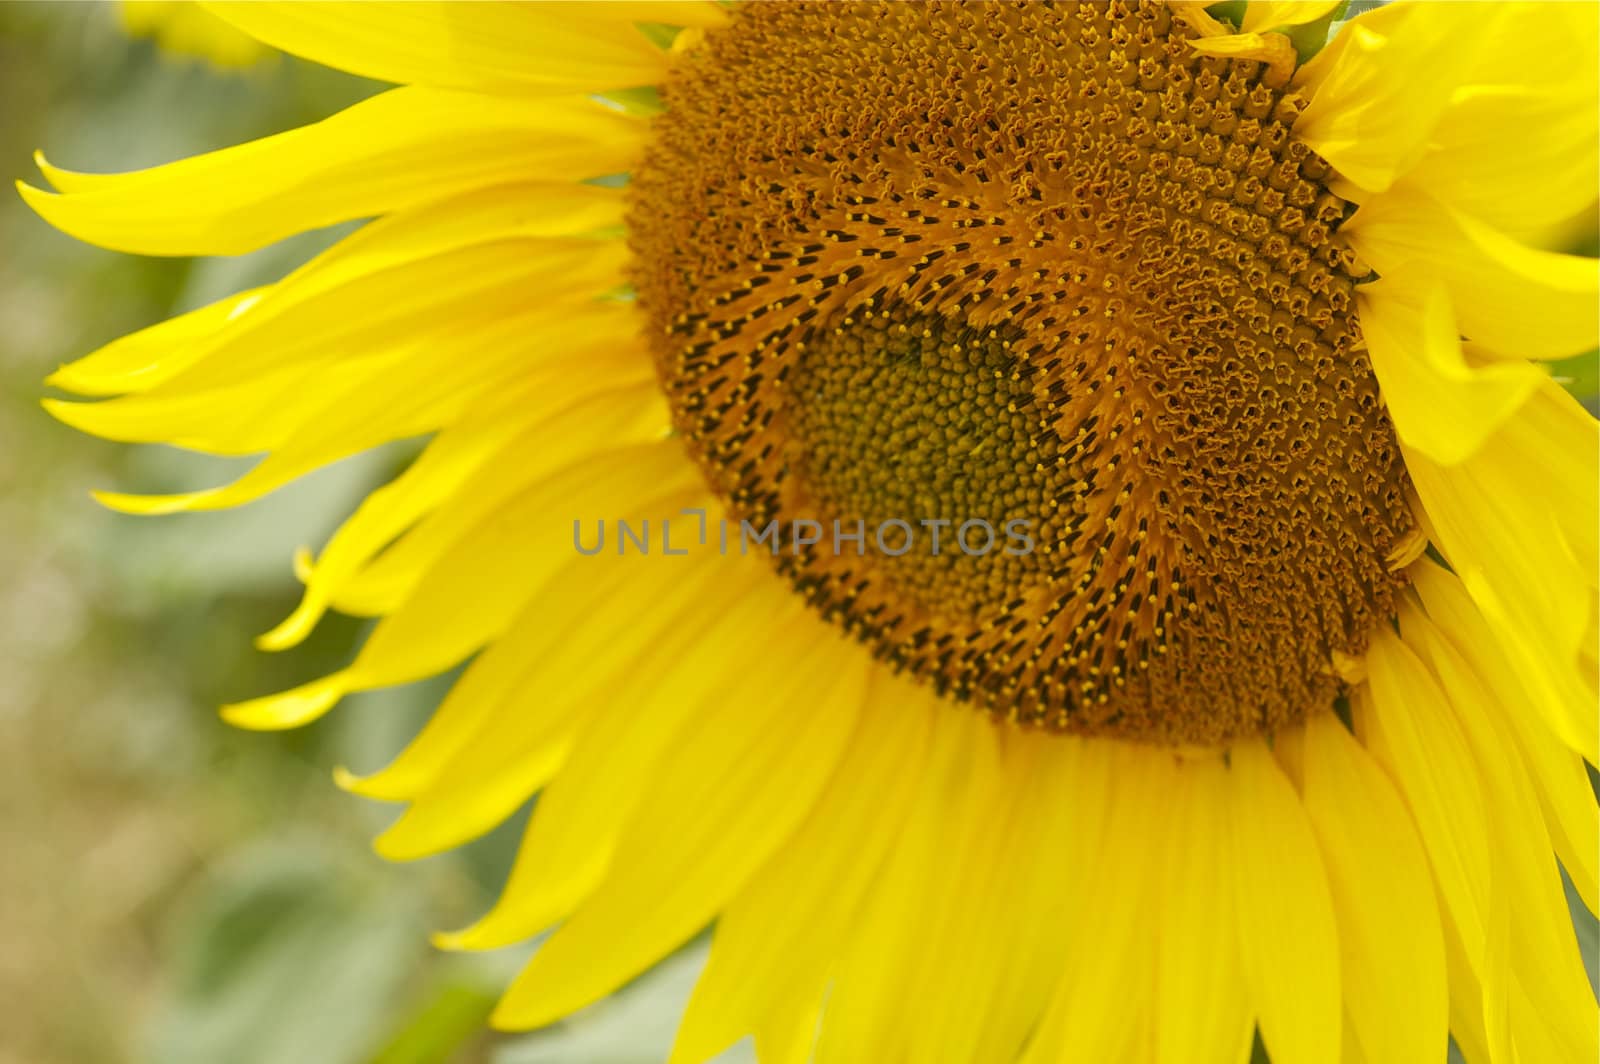 Close up single bright yellow sunflower facing into camera against a green background, with copy space.